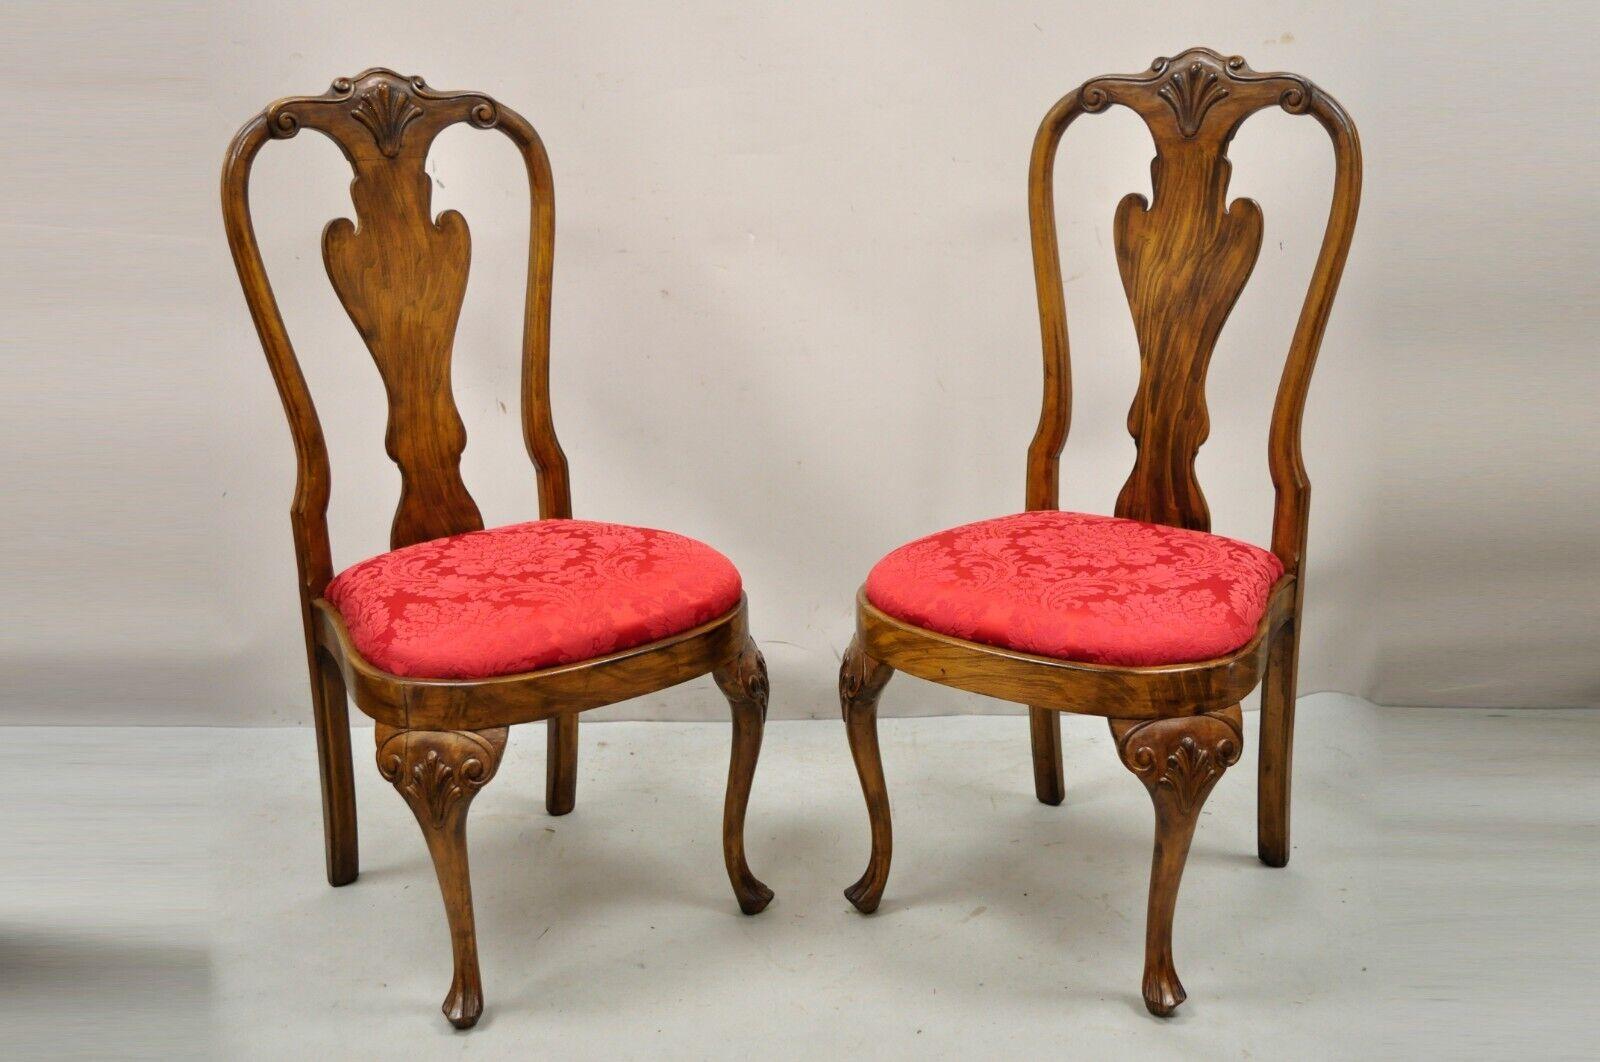 Vintage Queen Anne style shell carved solid wood dining chairs - set of 8. Item features (8) side chairs, carved knees, carved splat backs, red upholstered seats, shell carved accents, solid wood frames, distressed finish, very nice vintage set,